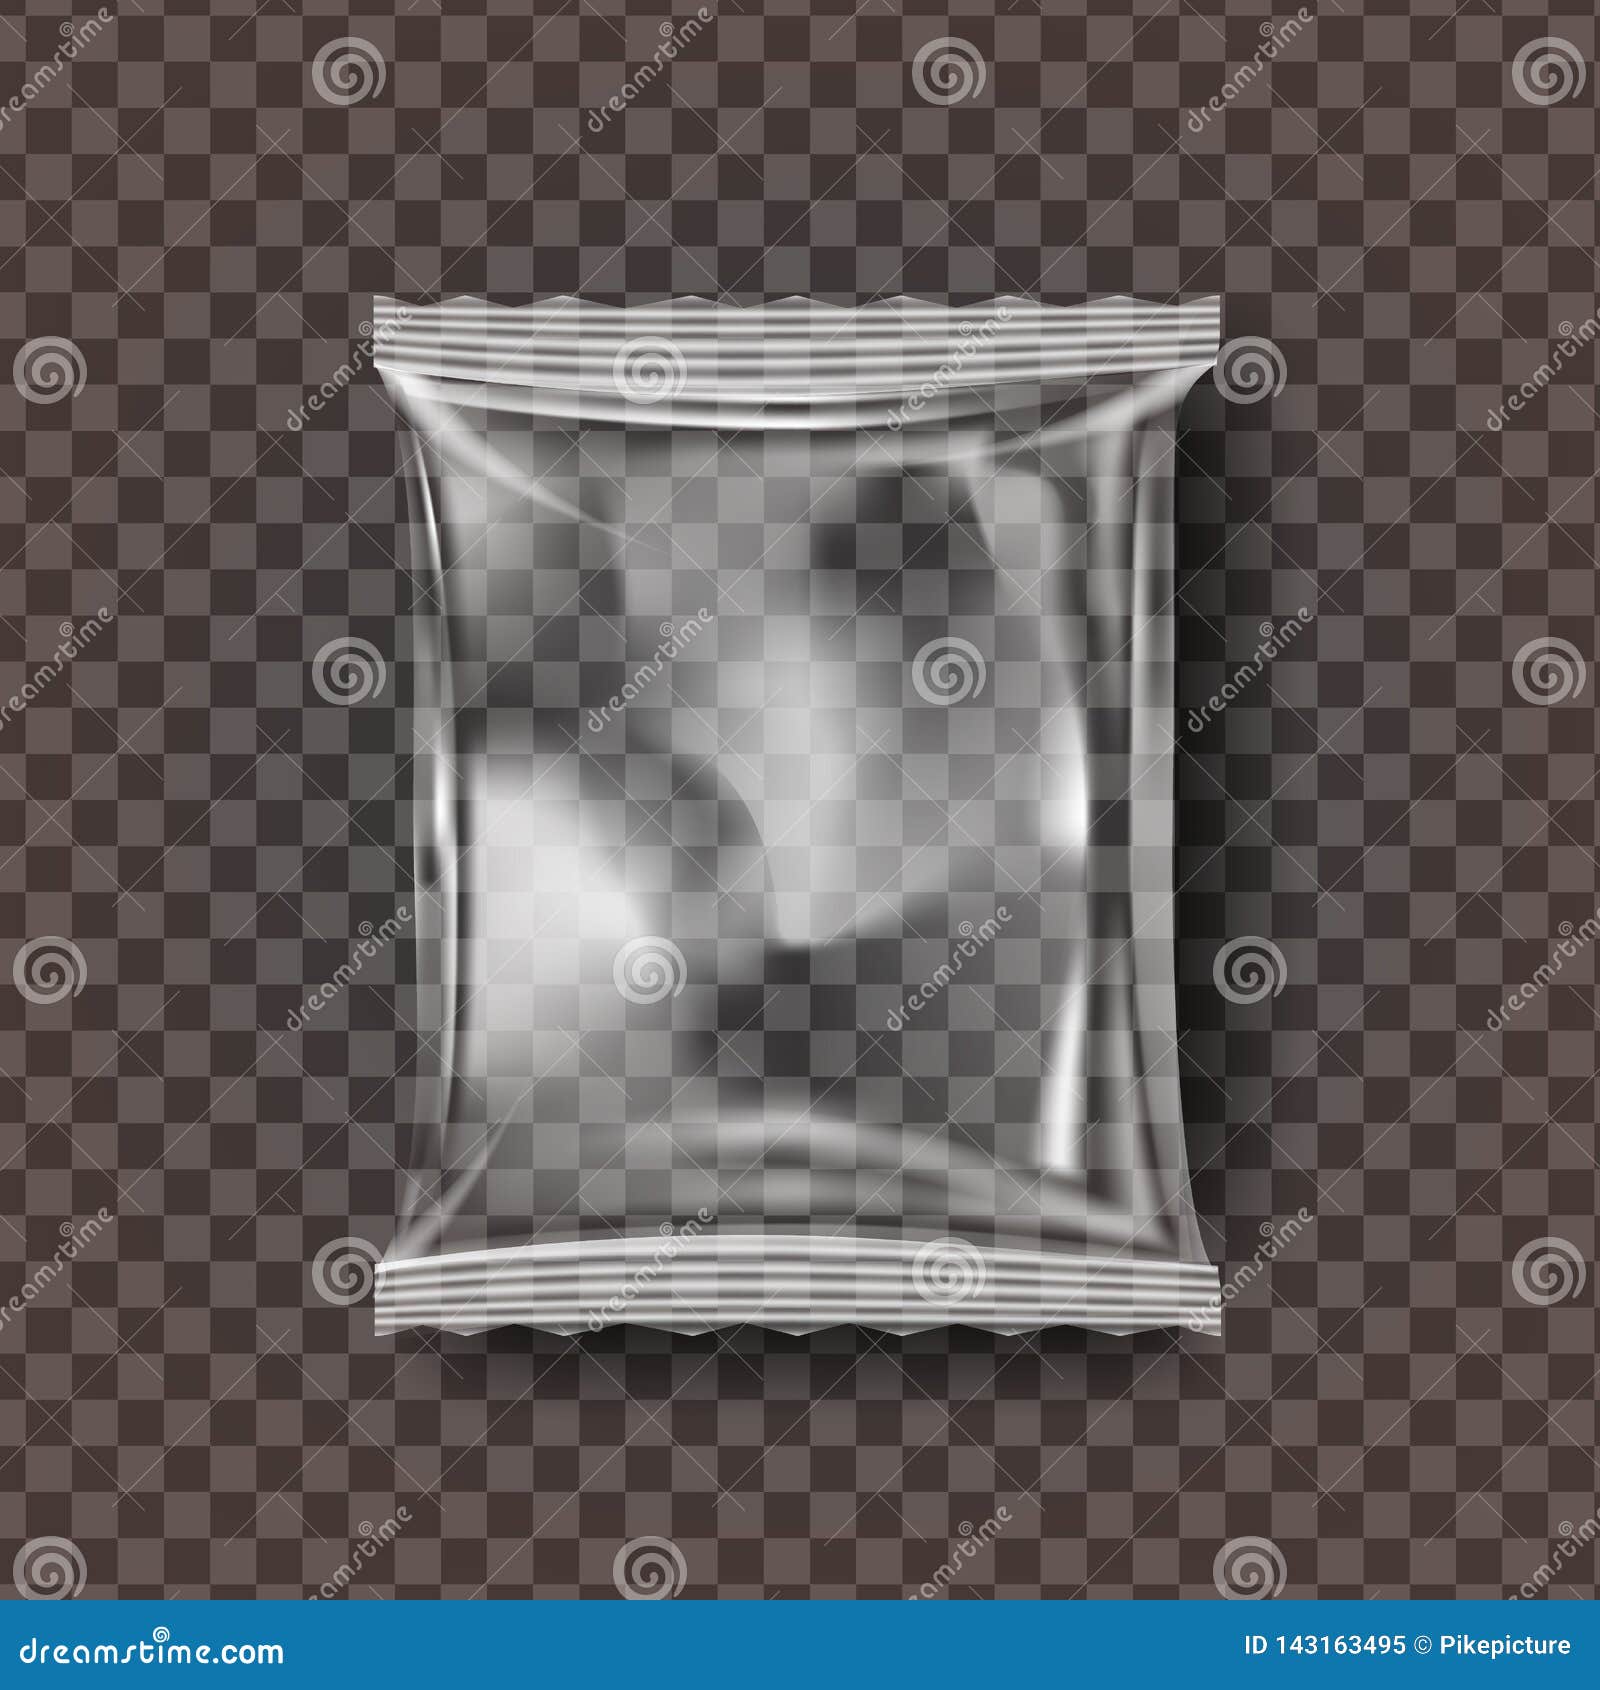 plastic snack packaging . transparent pillow bag wrap. empty product polyethylene mock up template. nylon doy pack